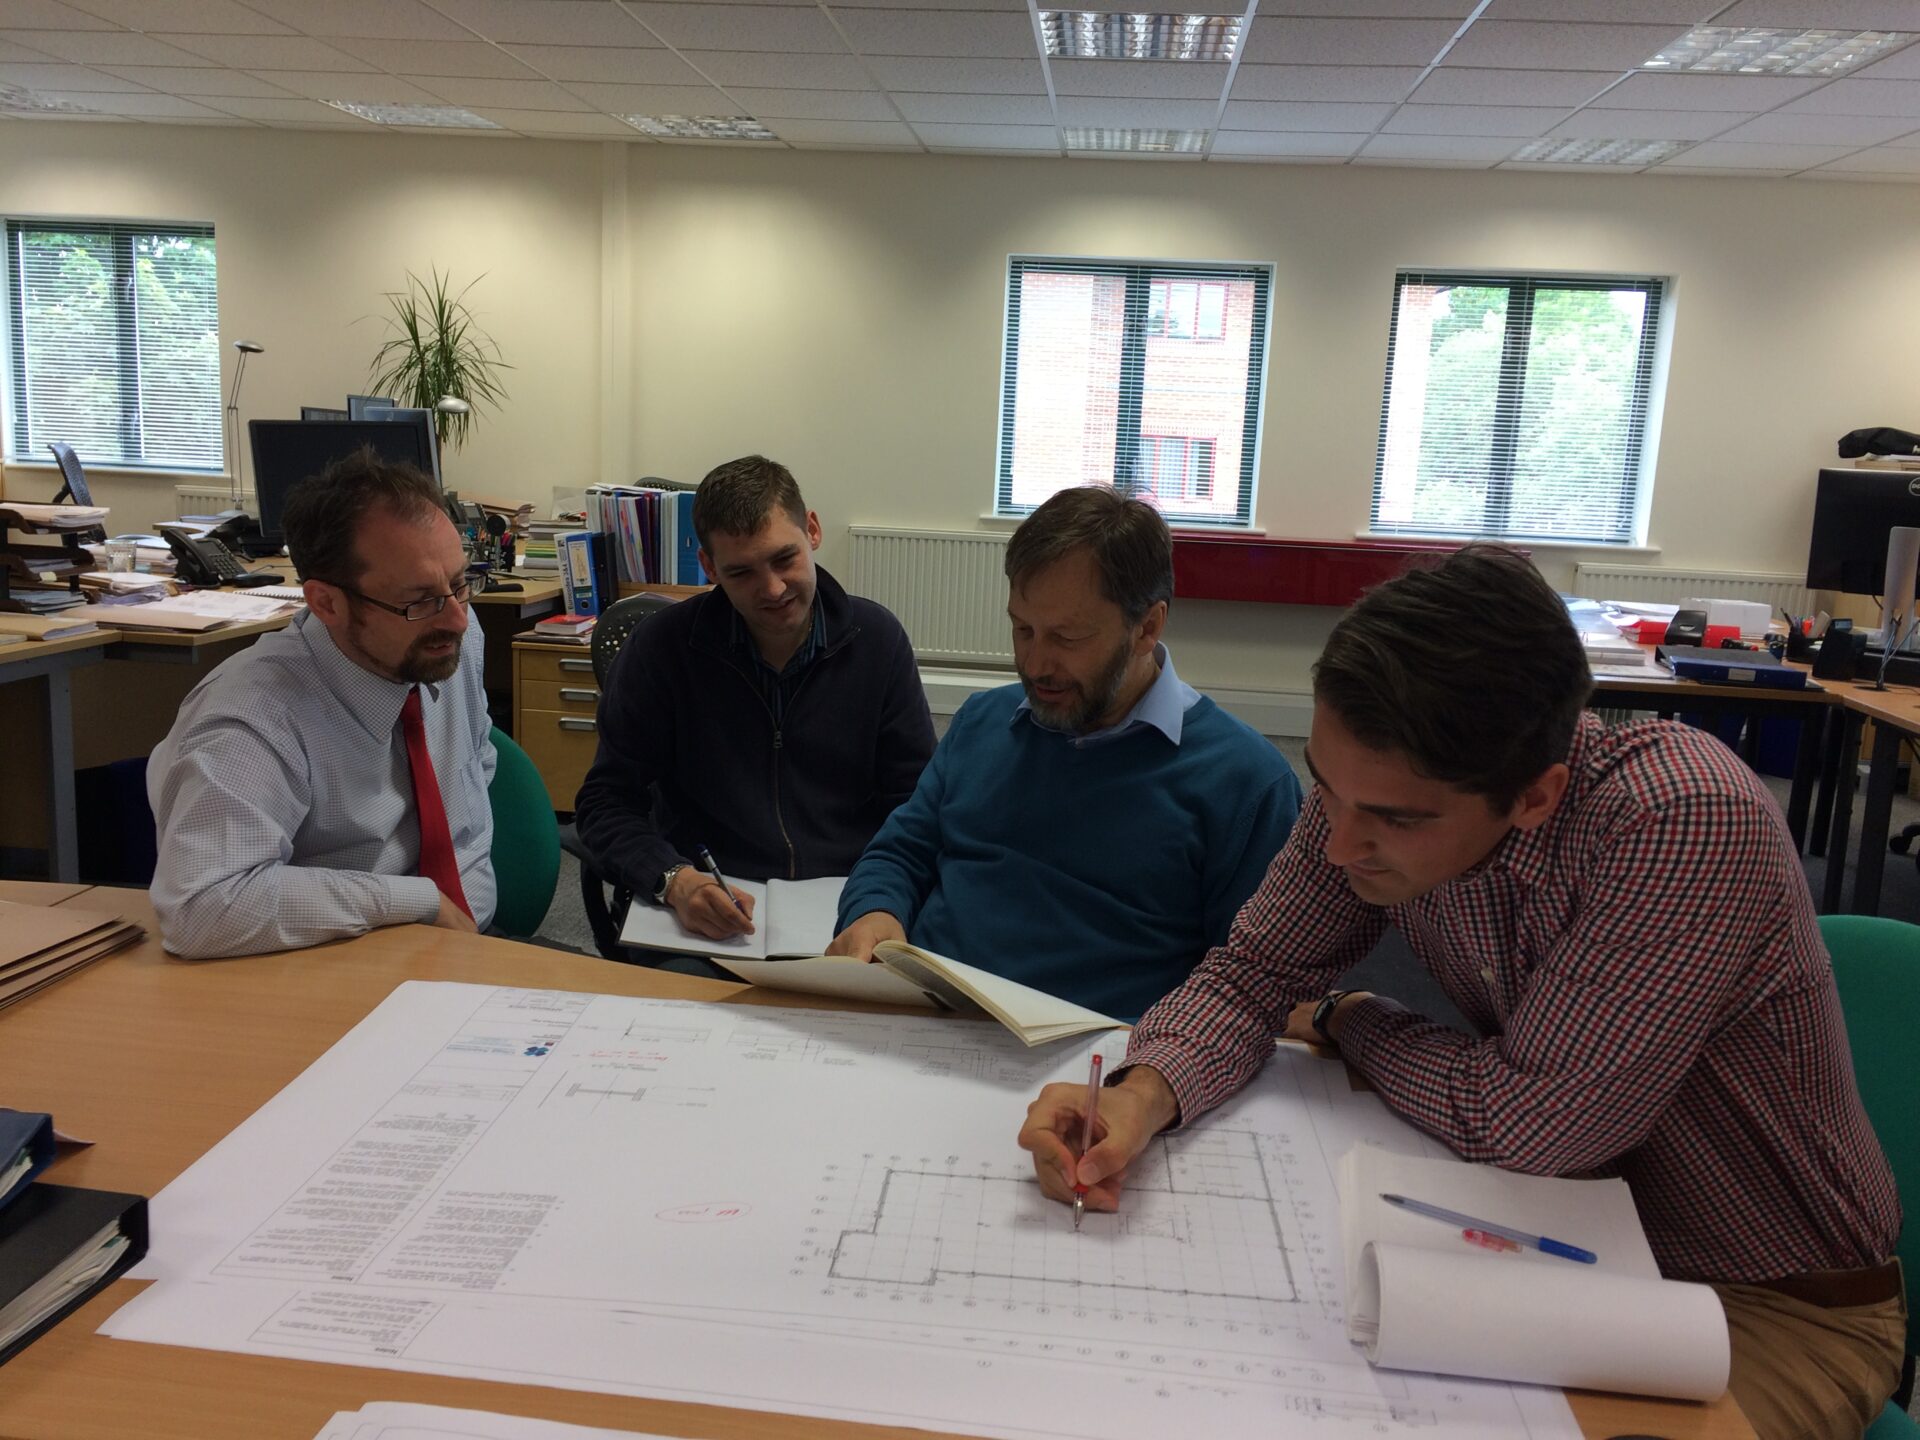 Clegg Associates team working on some diagrams in an office together.